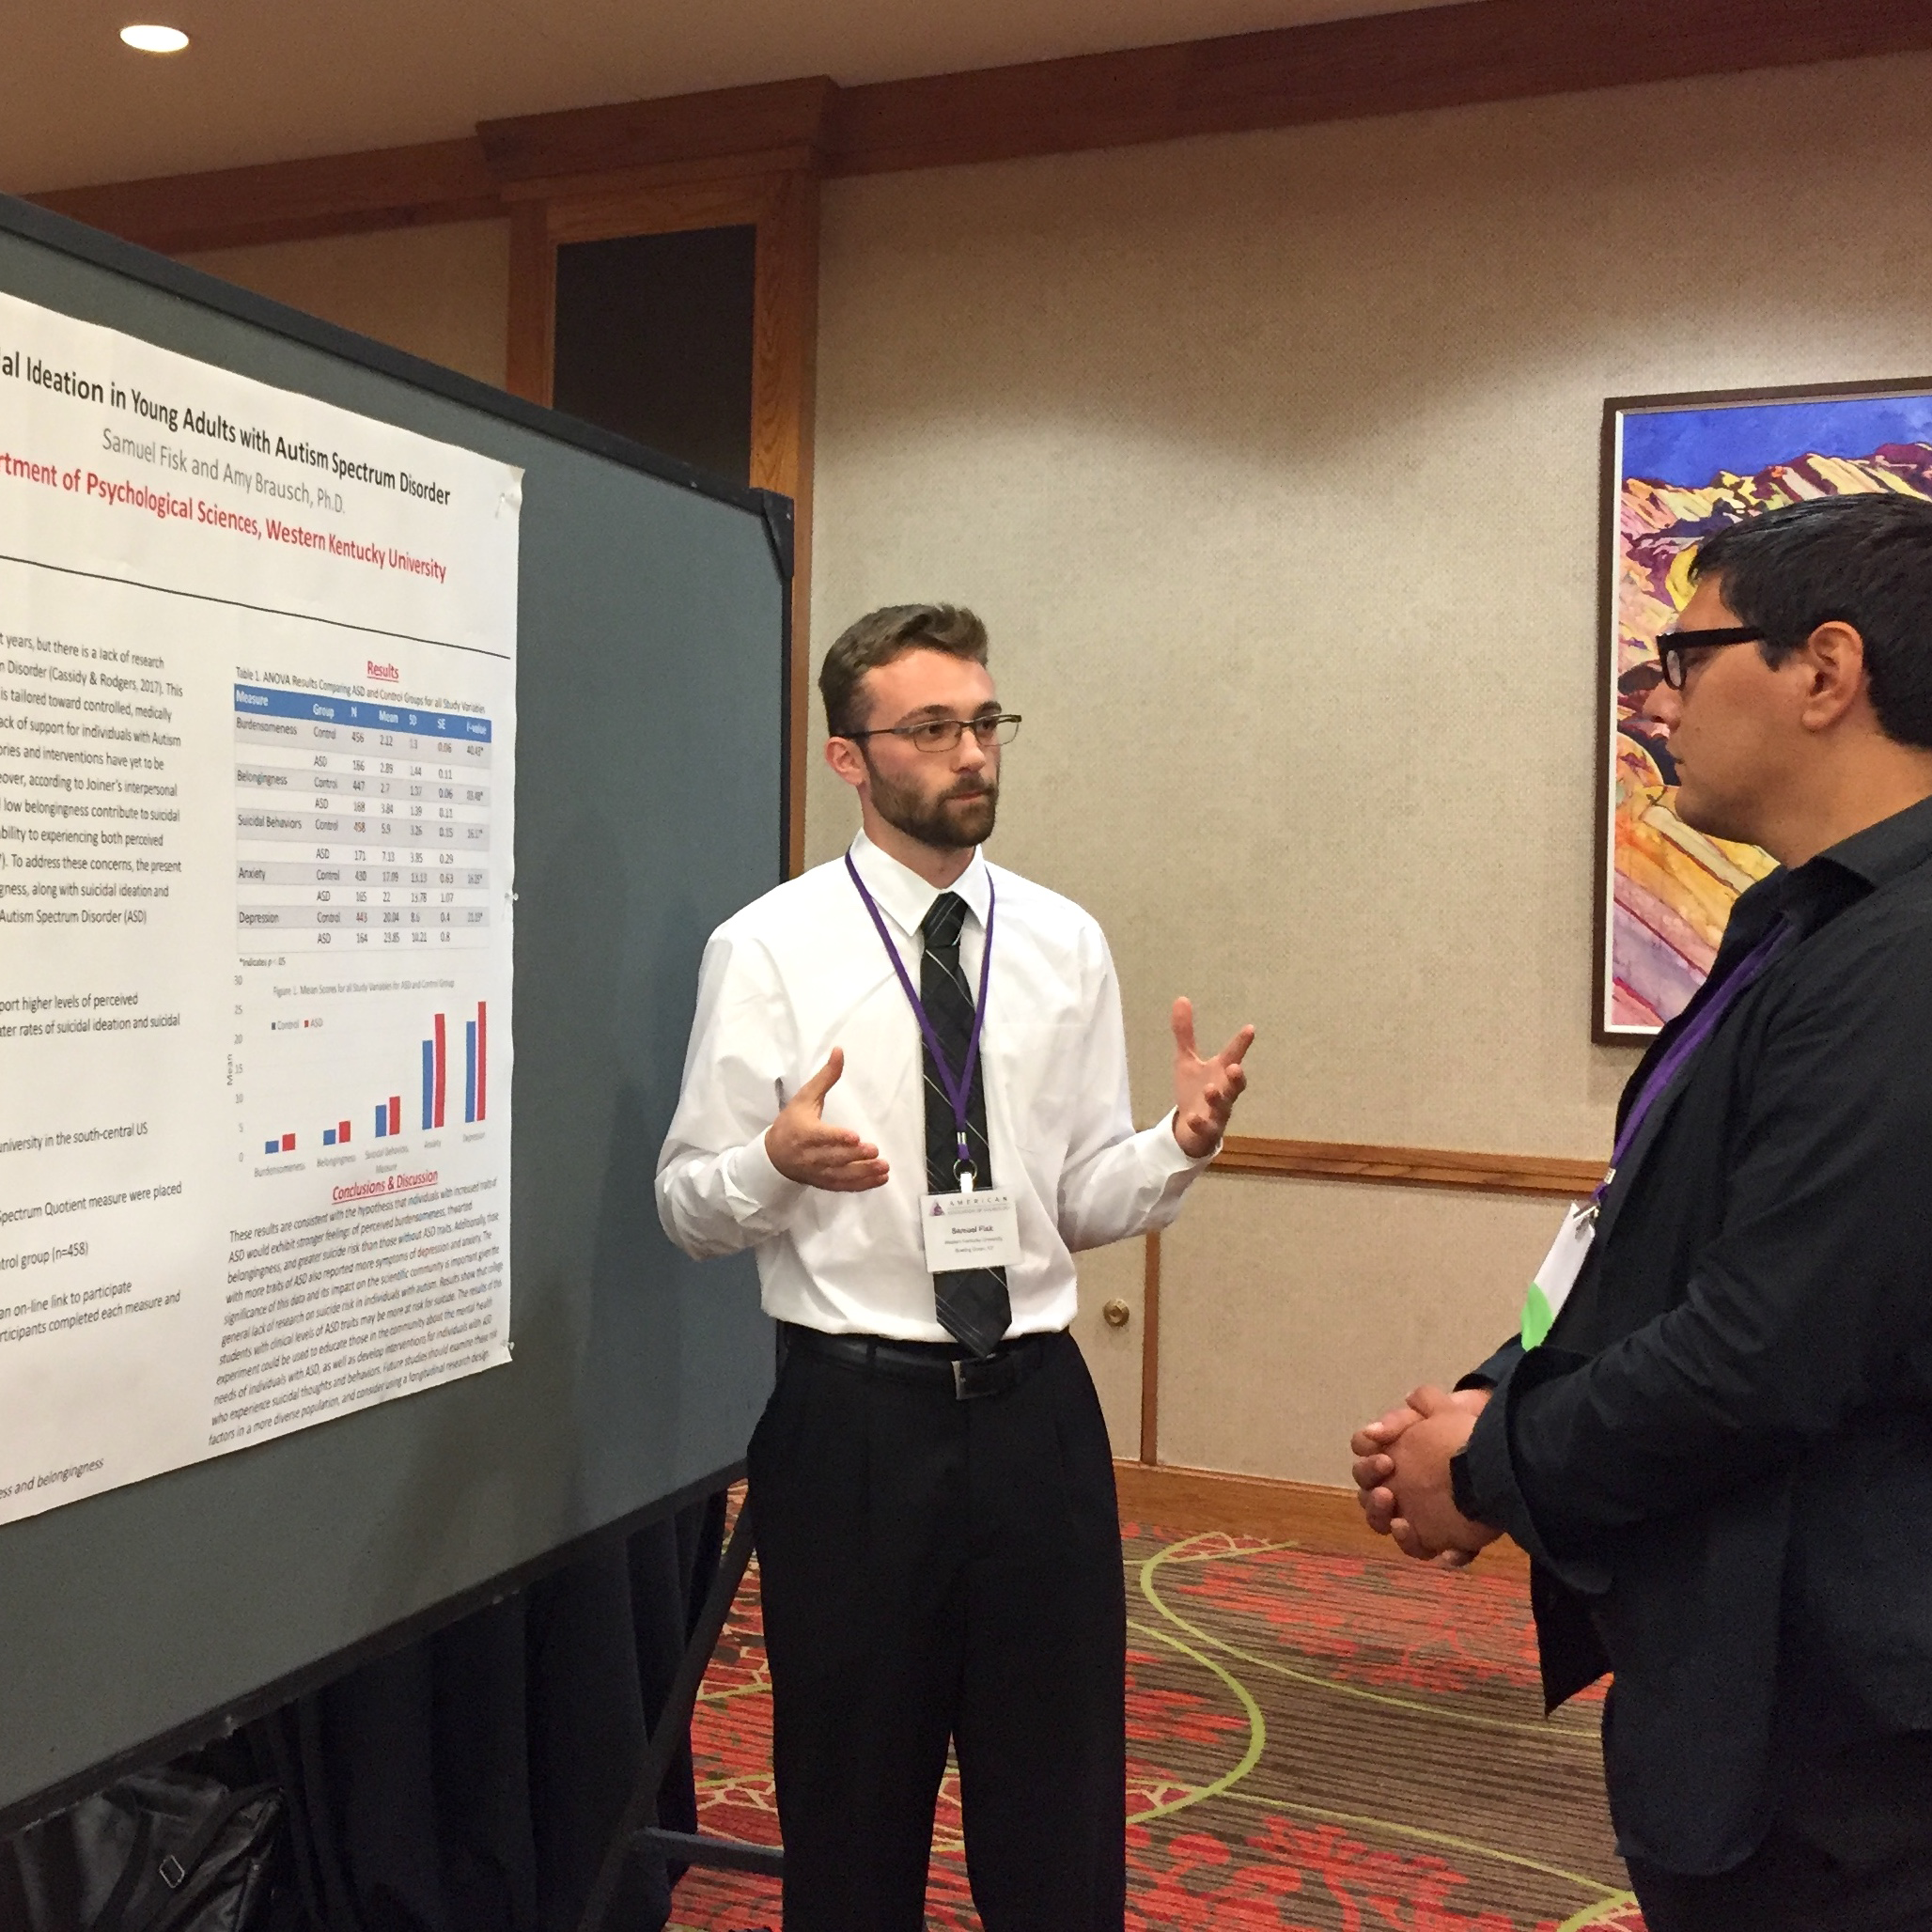 WKU student presents his research.